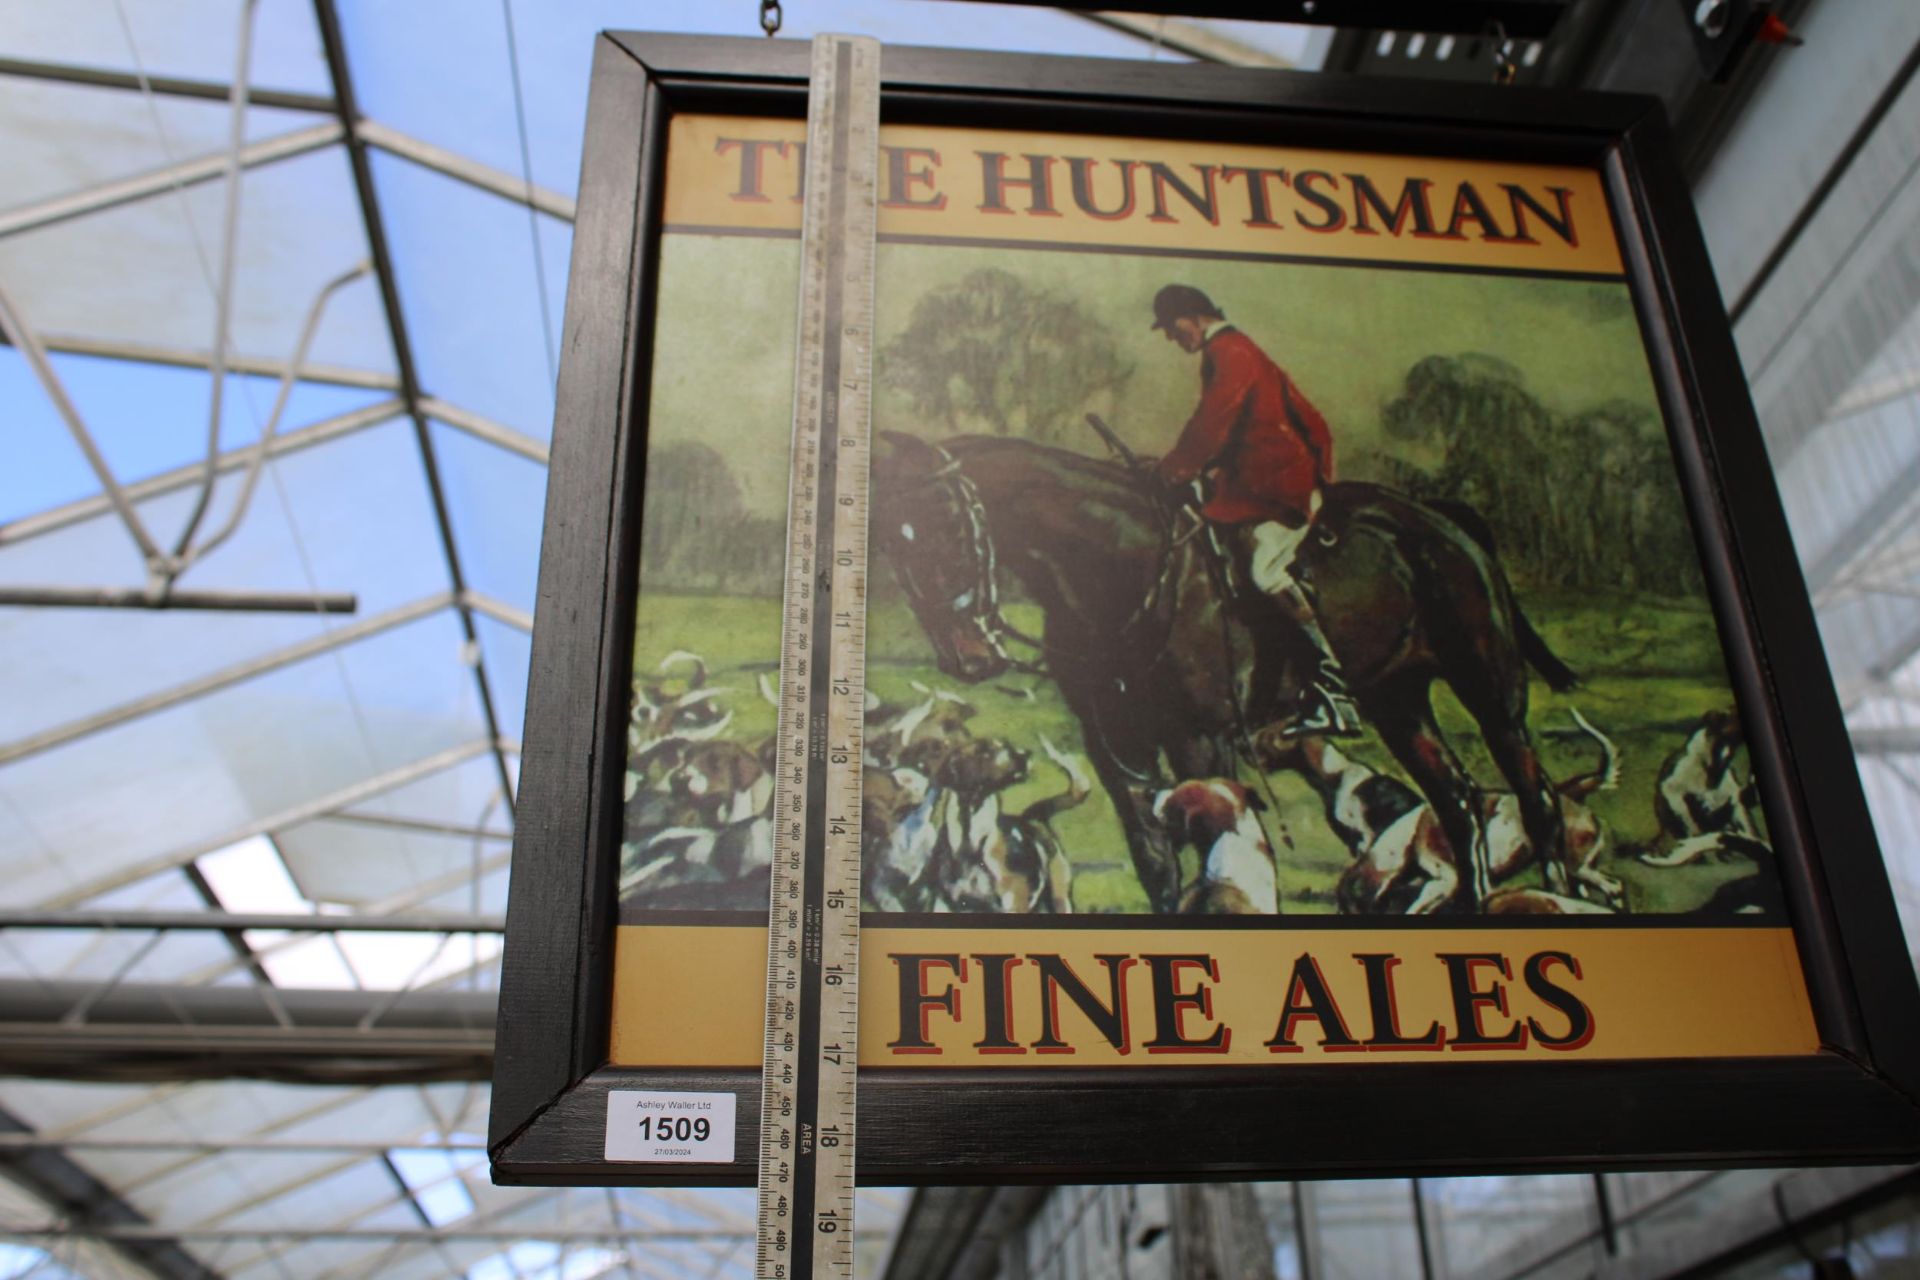 A DOUBLE SIDED WOODEN 'THE HUNTSMAN' PUB SIGN WITH CAST IRON WALL MOUNTING BRACKET - Image 6 of 6